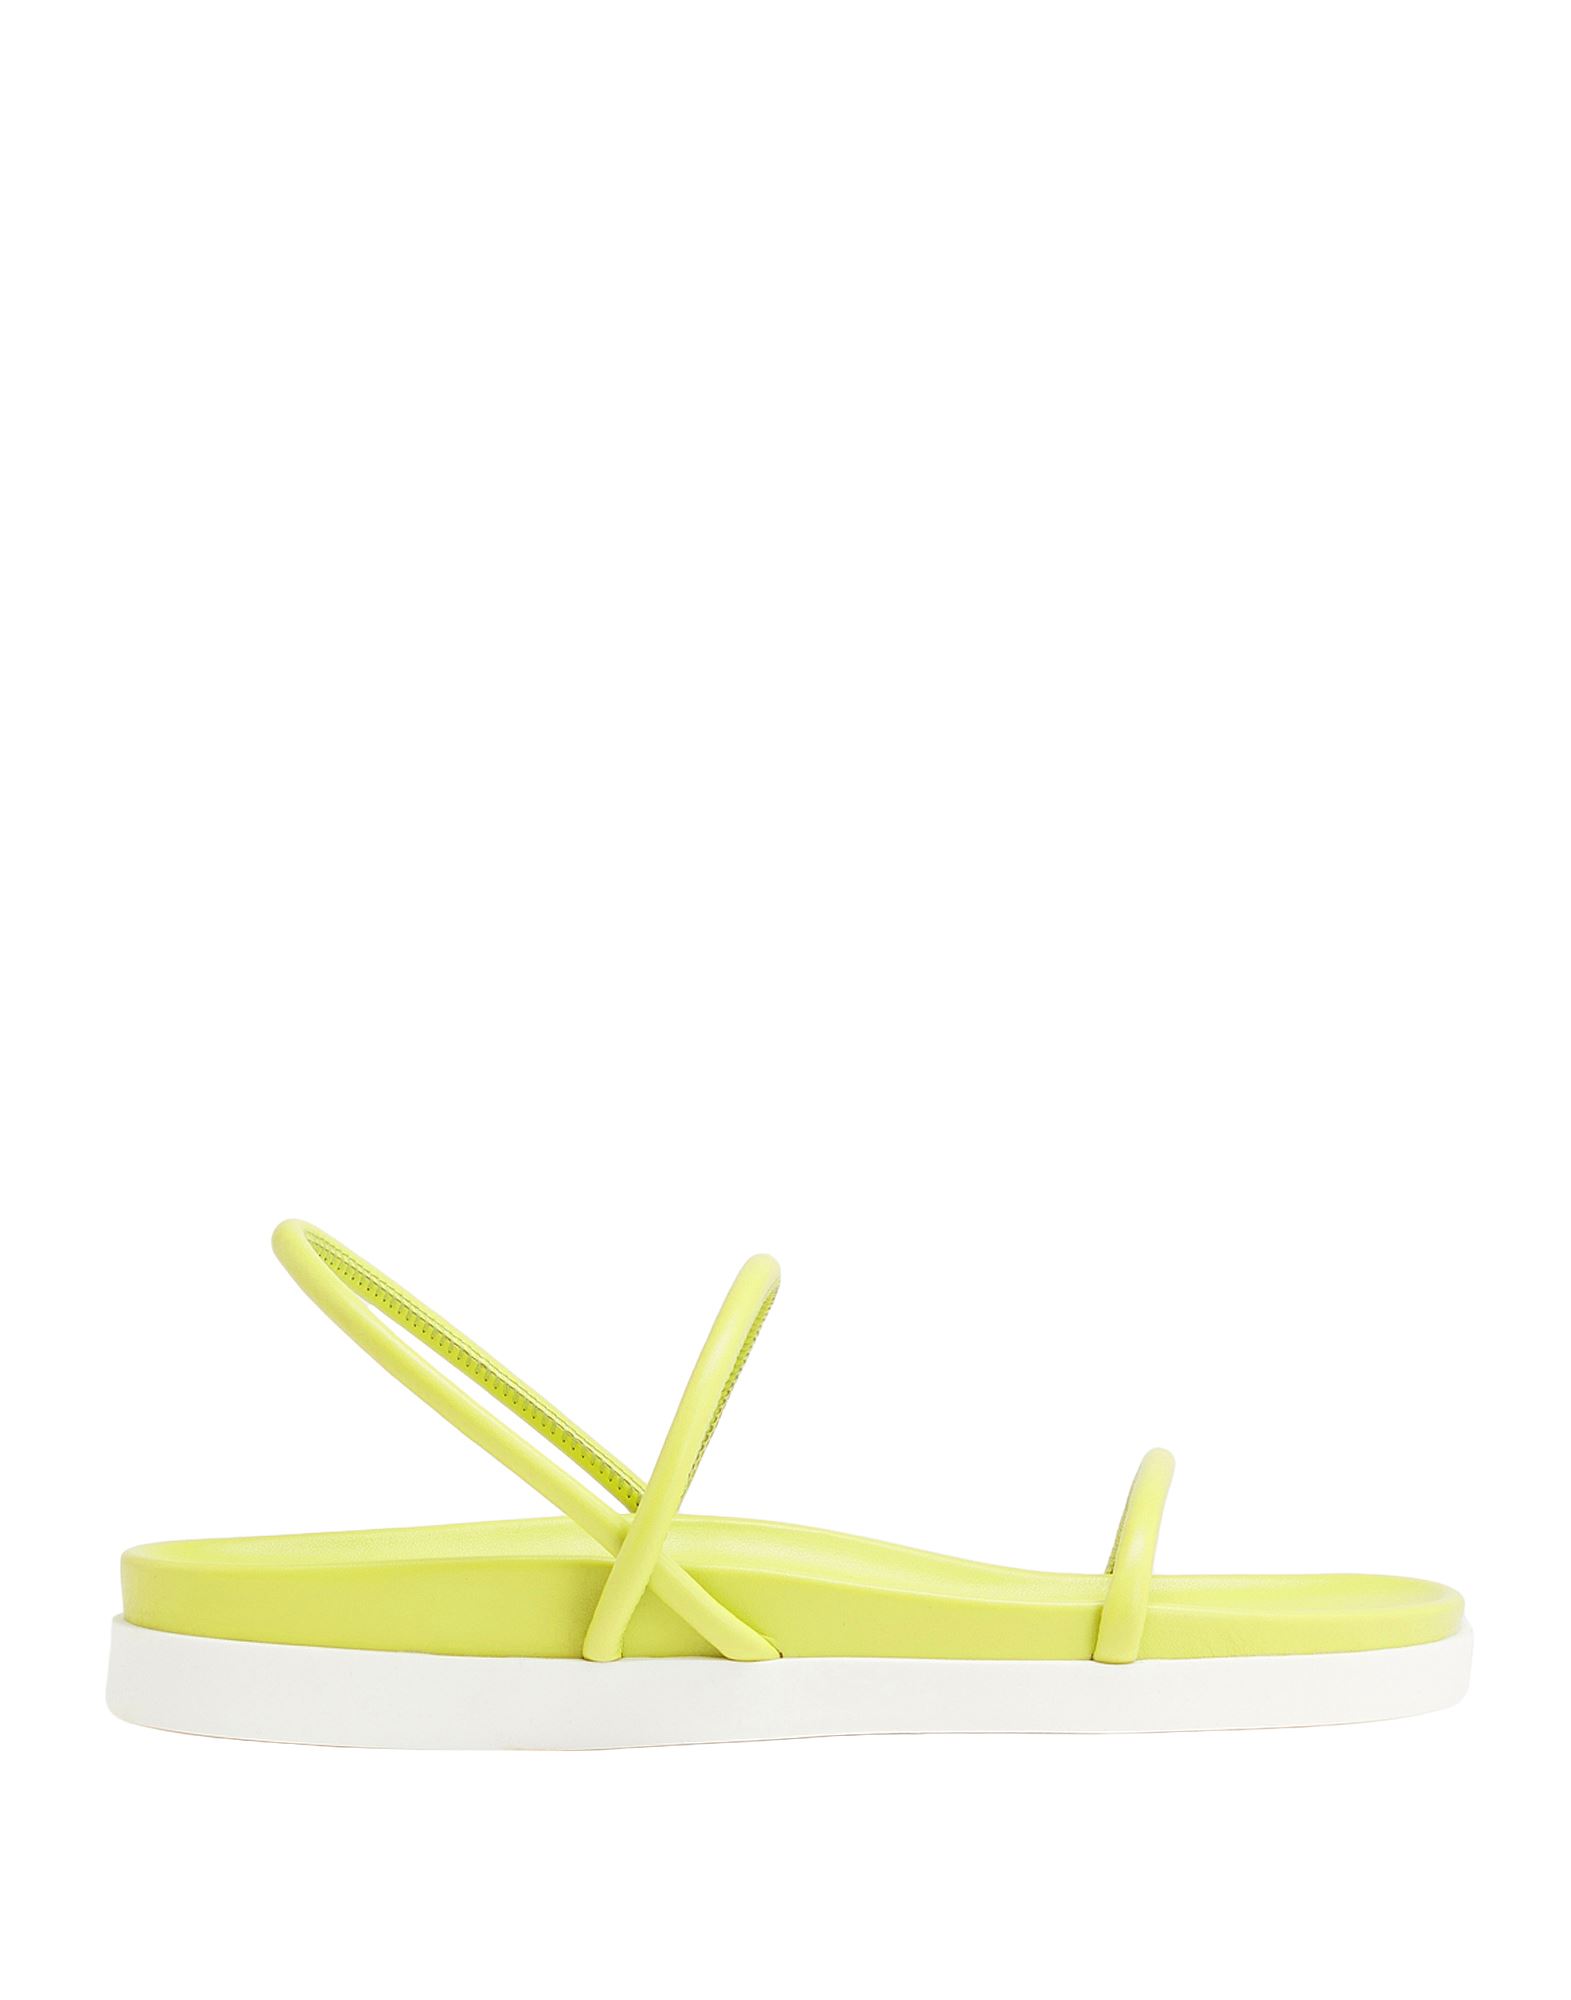 8 By Yoox Sandals In Yellow